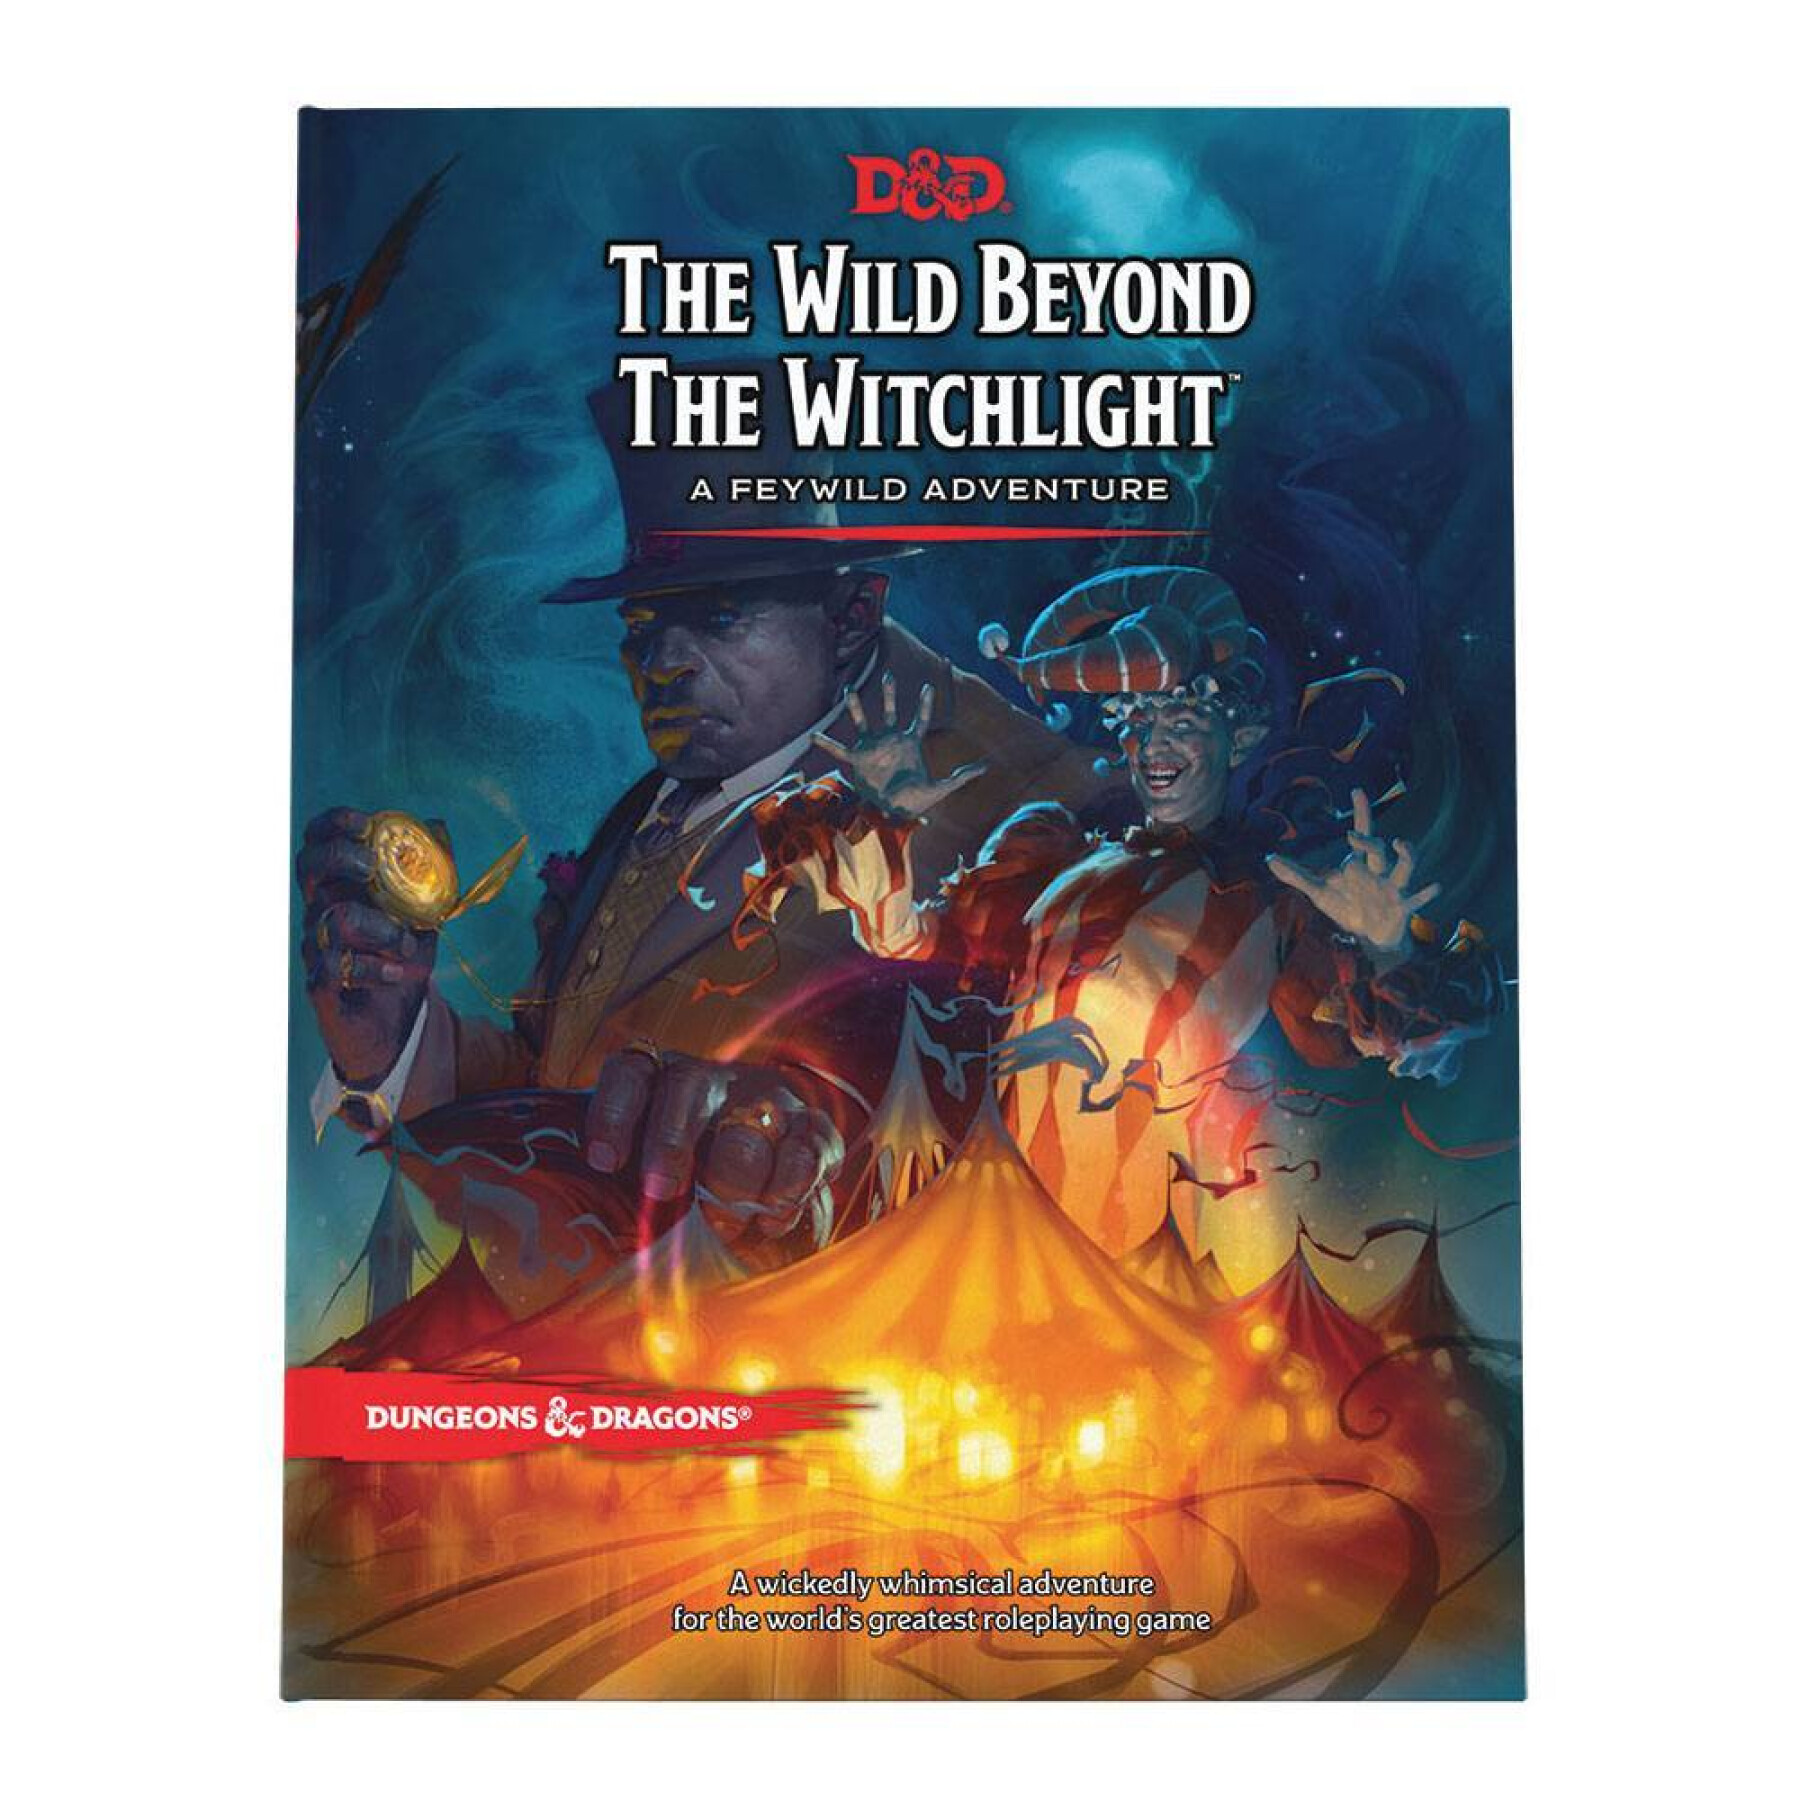 Board games adventure the wild beyond the witchlight a feywild adventure Wizards of the Coast Dungeons et Dragons RPG